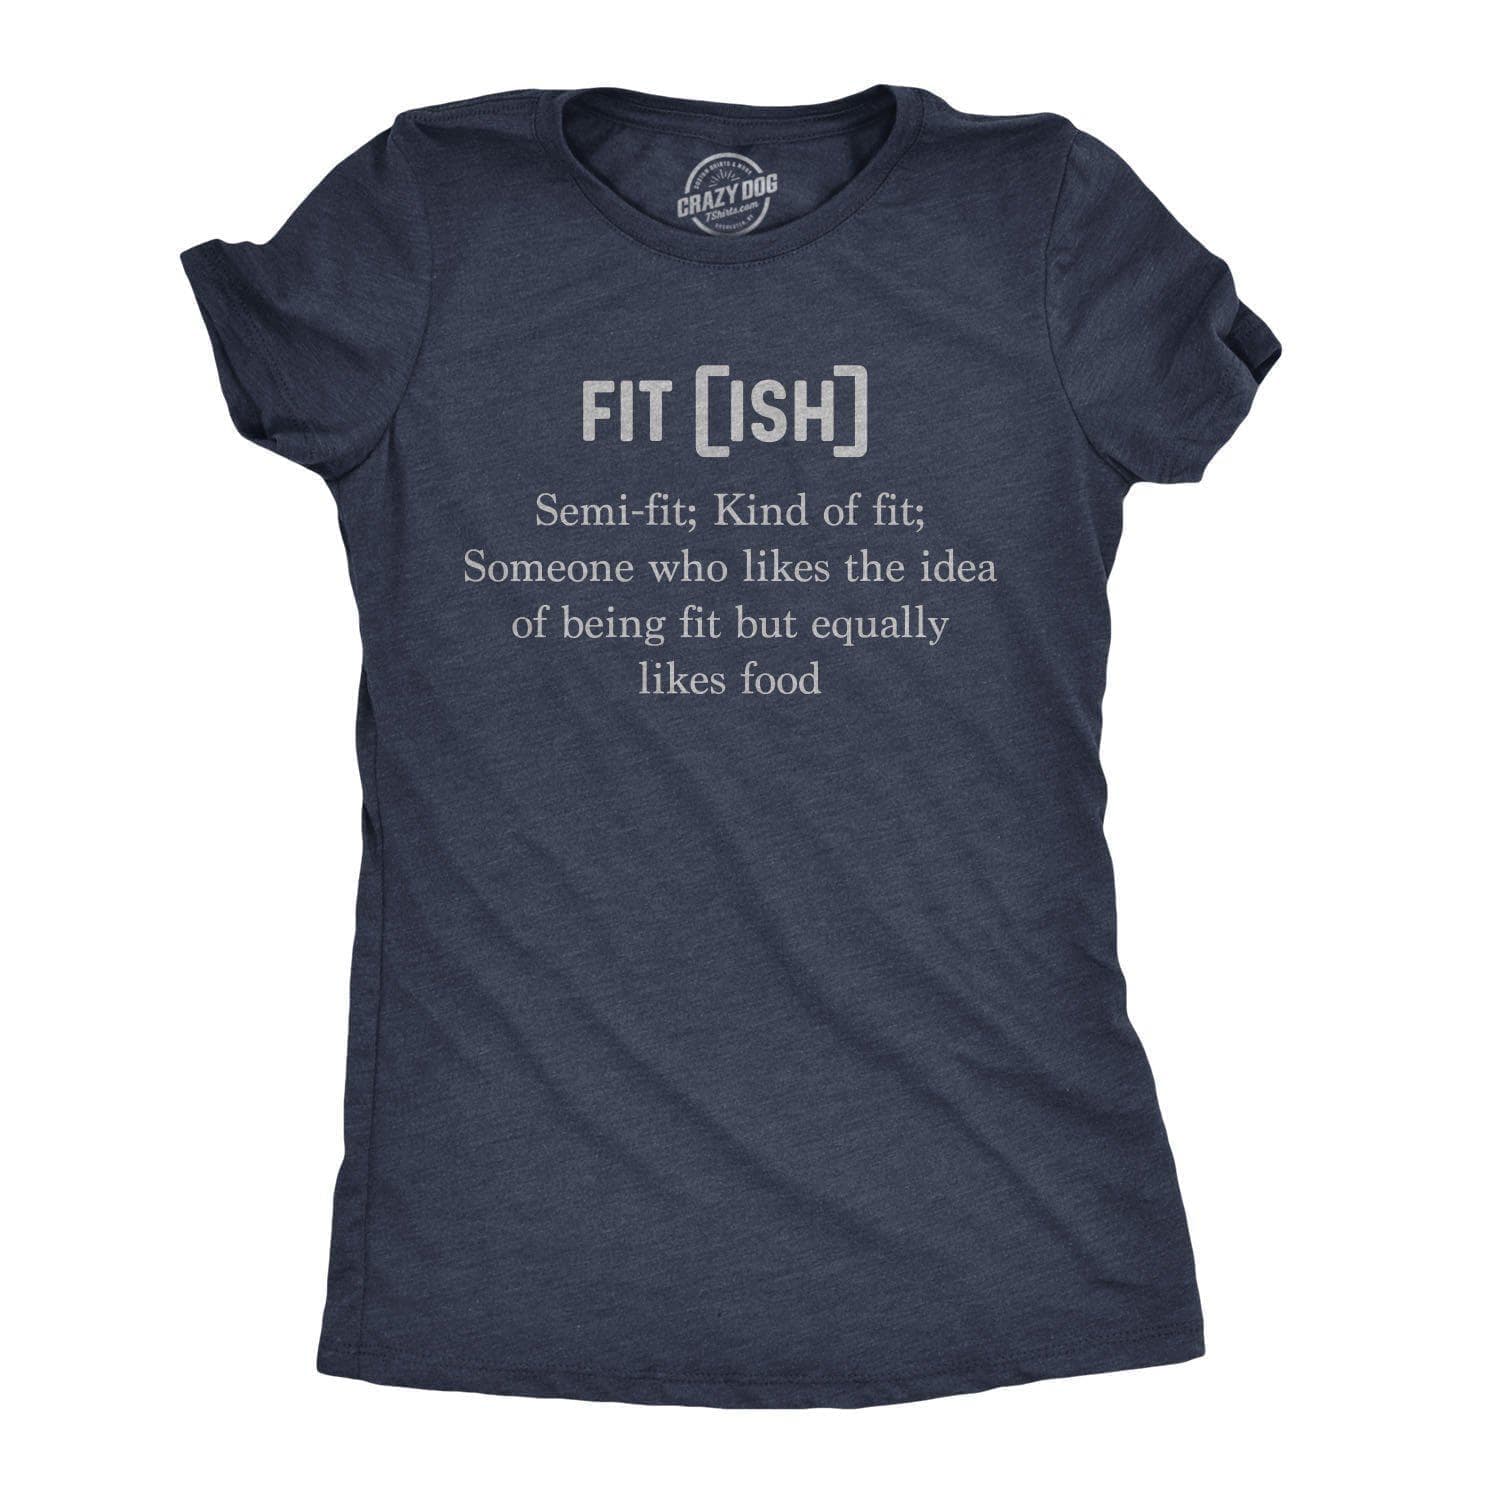 Crazy Dog T-shirts Womens The Best Things in Life Make You Sweat Tshirt Funny Fitness Workout Novelty Tee Womens Graphic Tees, Women's, Size: Small